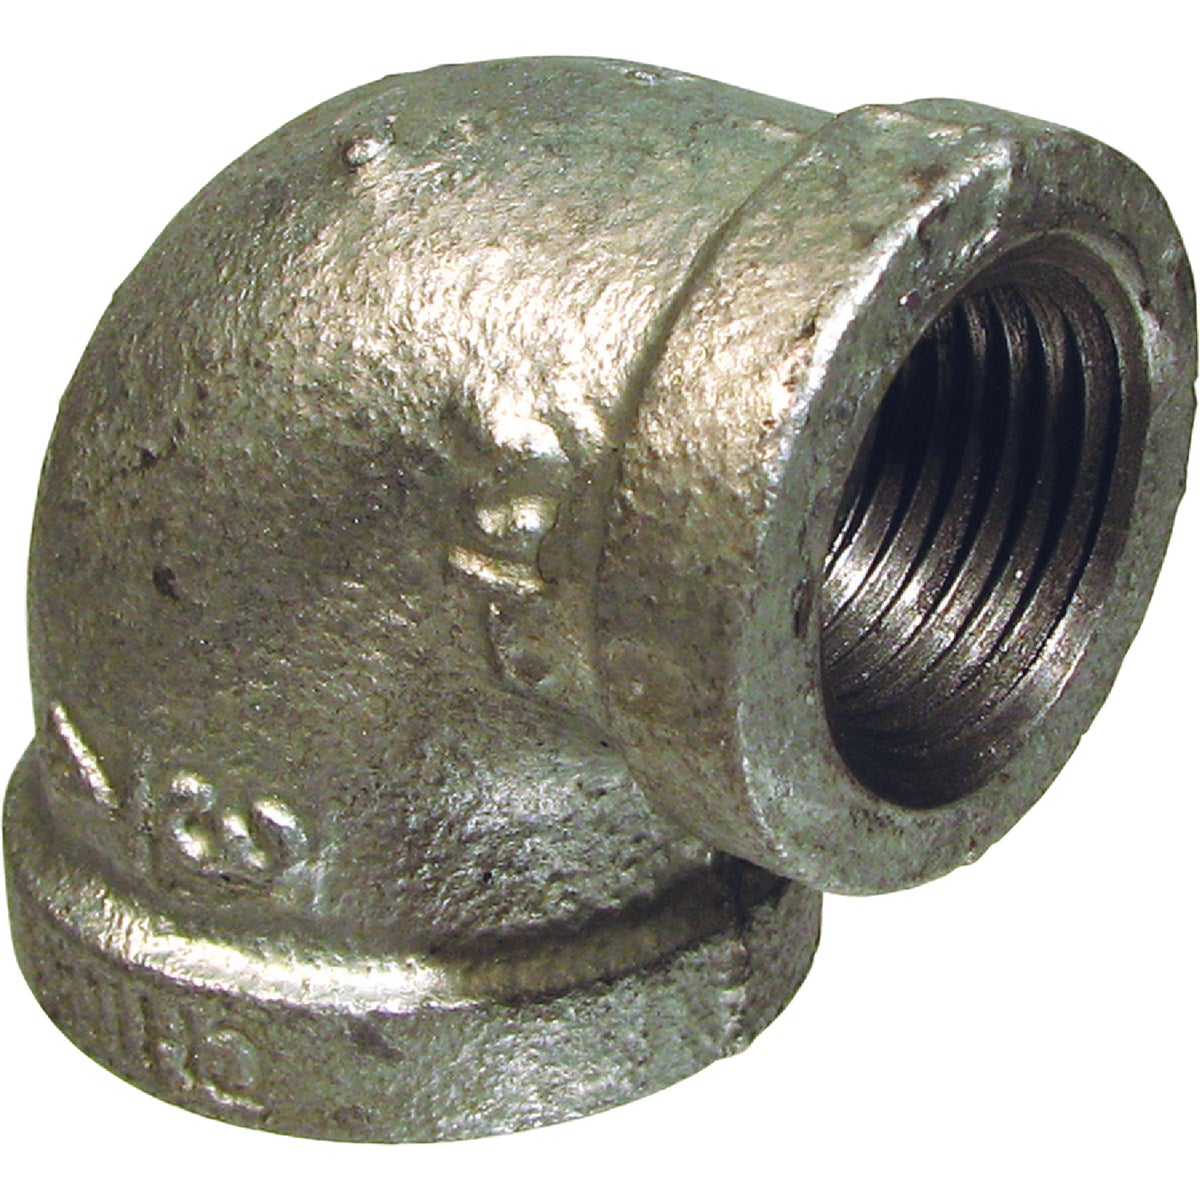 Southland 3/4 In. x 1/2 In. 90 Deg. Reducing Galvanized Elbow (1/4 Bend)